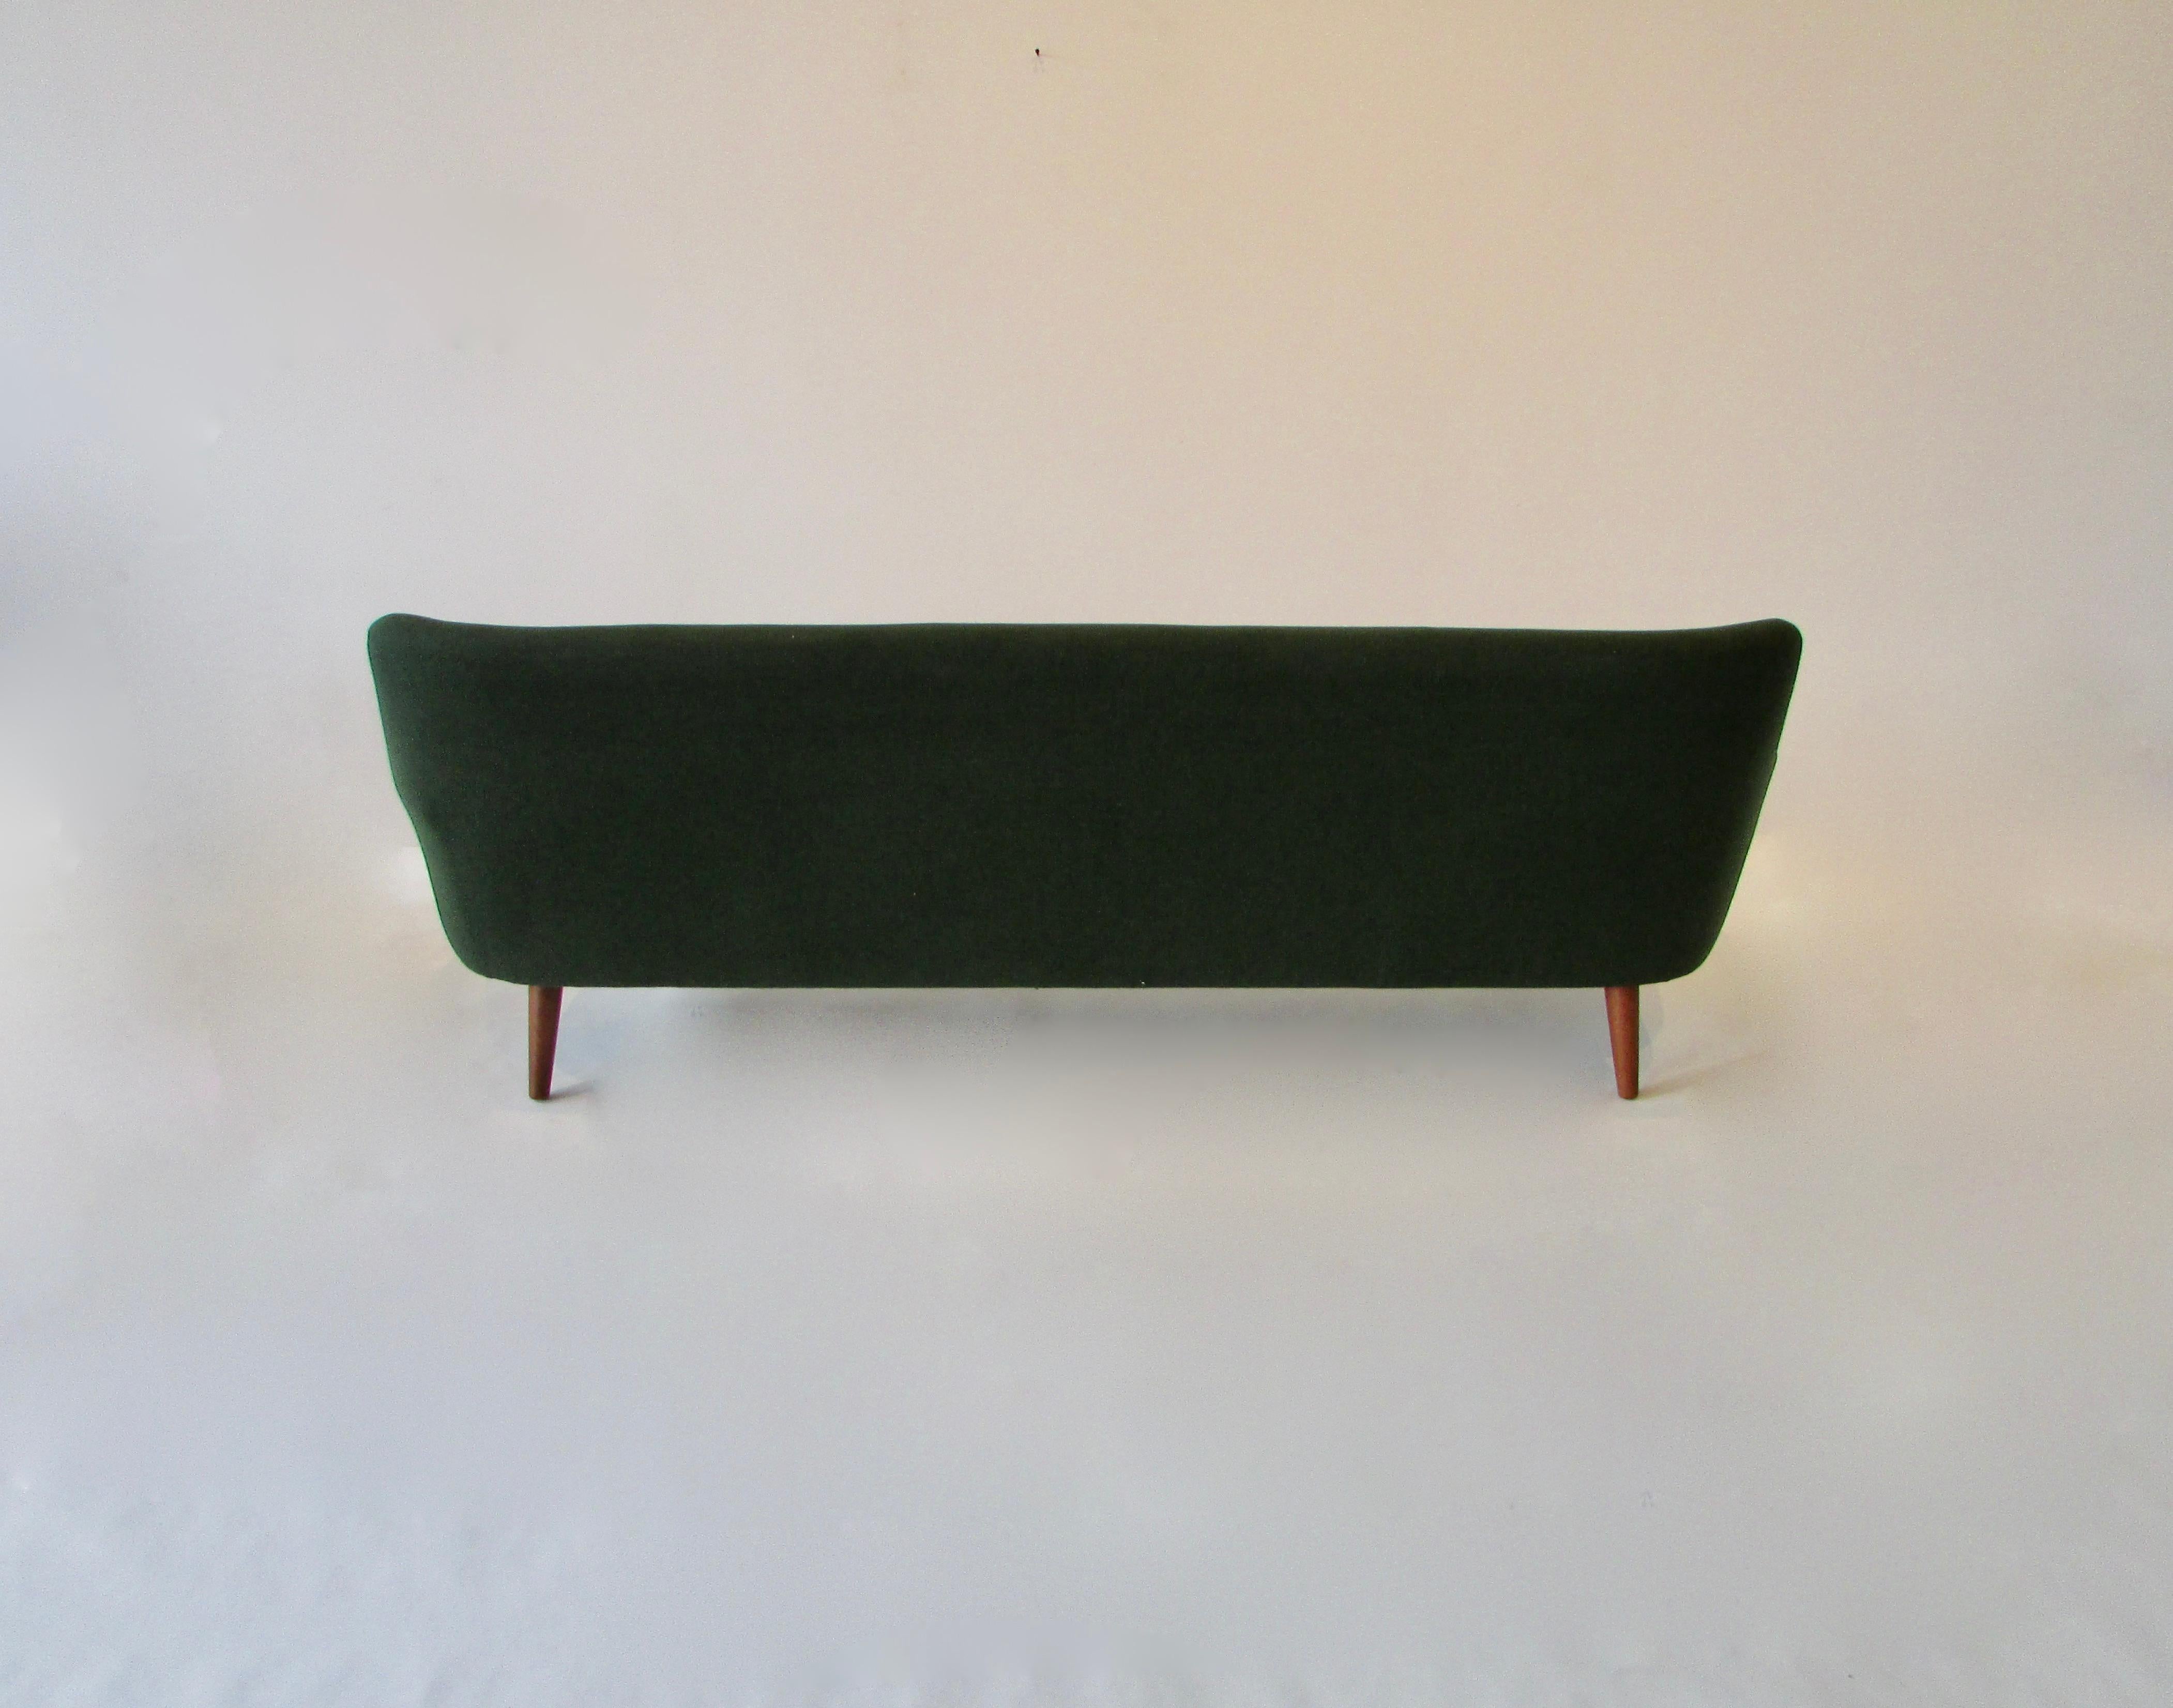 Danish couch with teak trimmed arms on thick teak spindle legs. Much in the style of Hans Wegner. Original green wool fabric is fine but foam has desiccated. Turning to powder. All too often I restore a couch or chairs only to sell and ship to